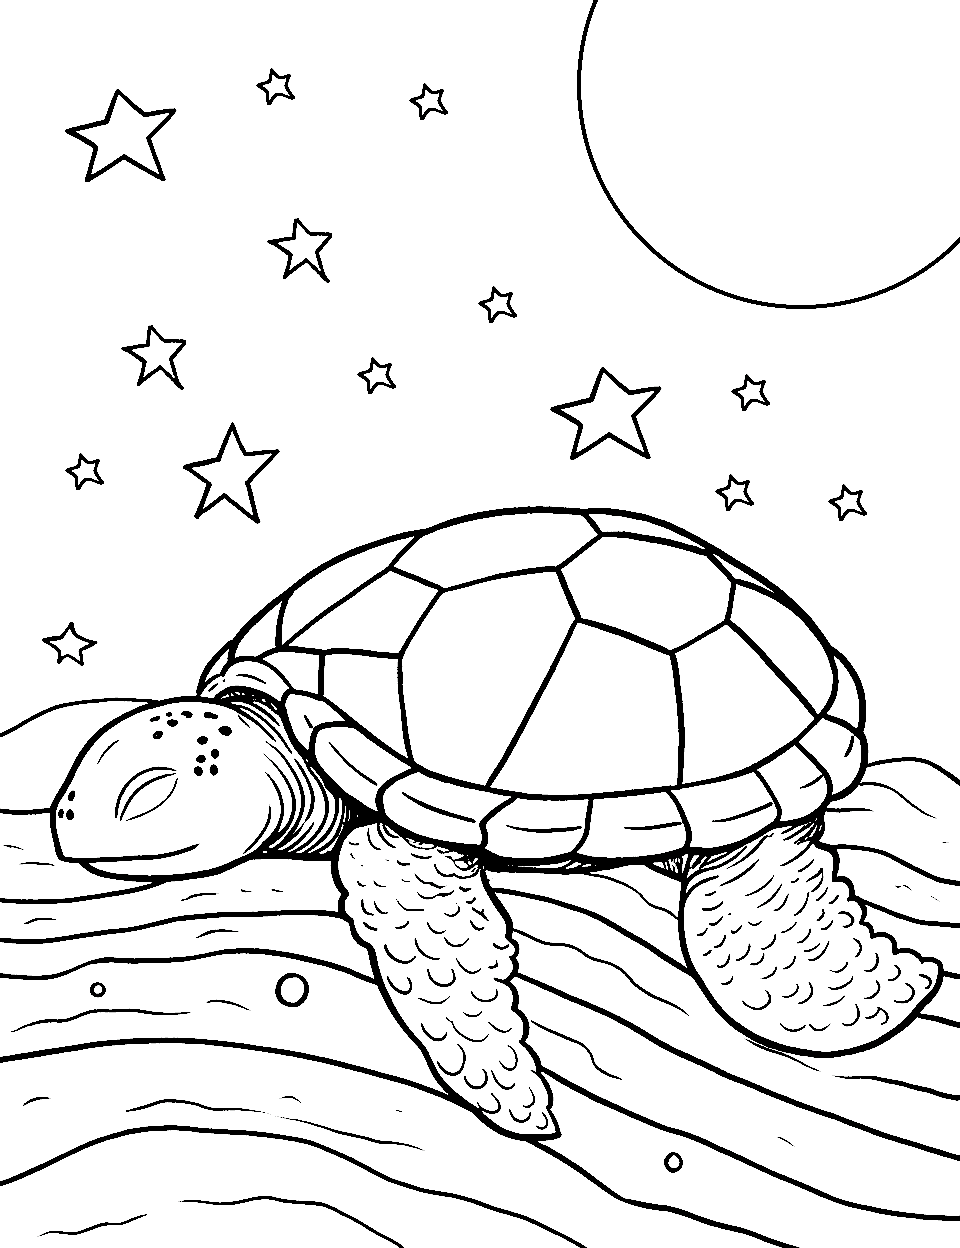 Starry Night Sleep Turtle Coloring Page - A turtle sleeping under a sky full of stars.